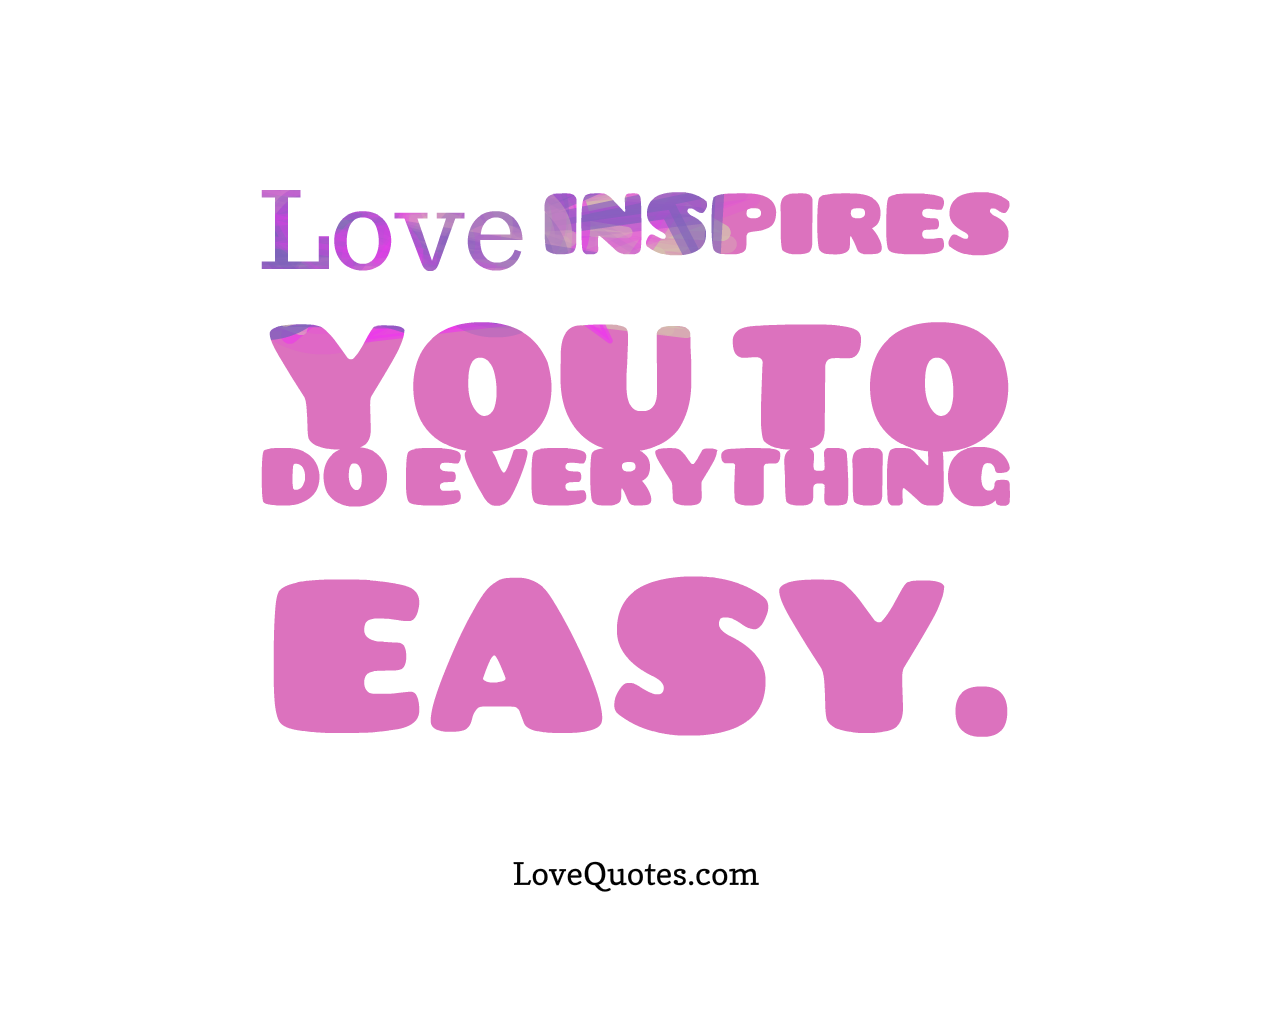 Love Inspires You